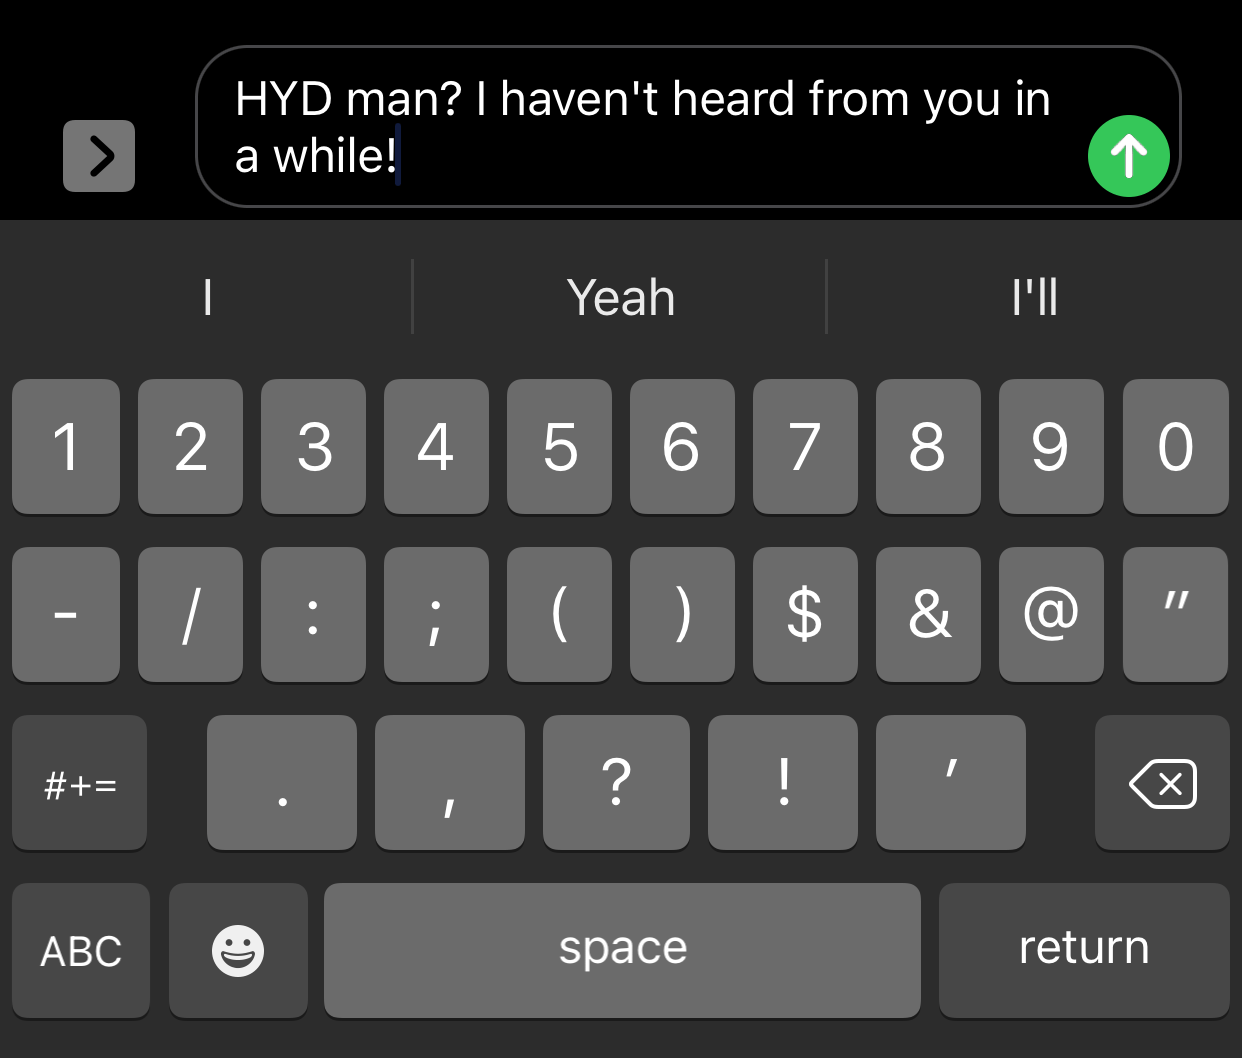 An example of the initialism HYD in a text message.